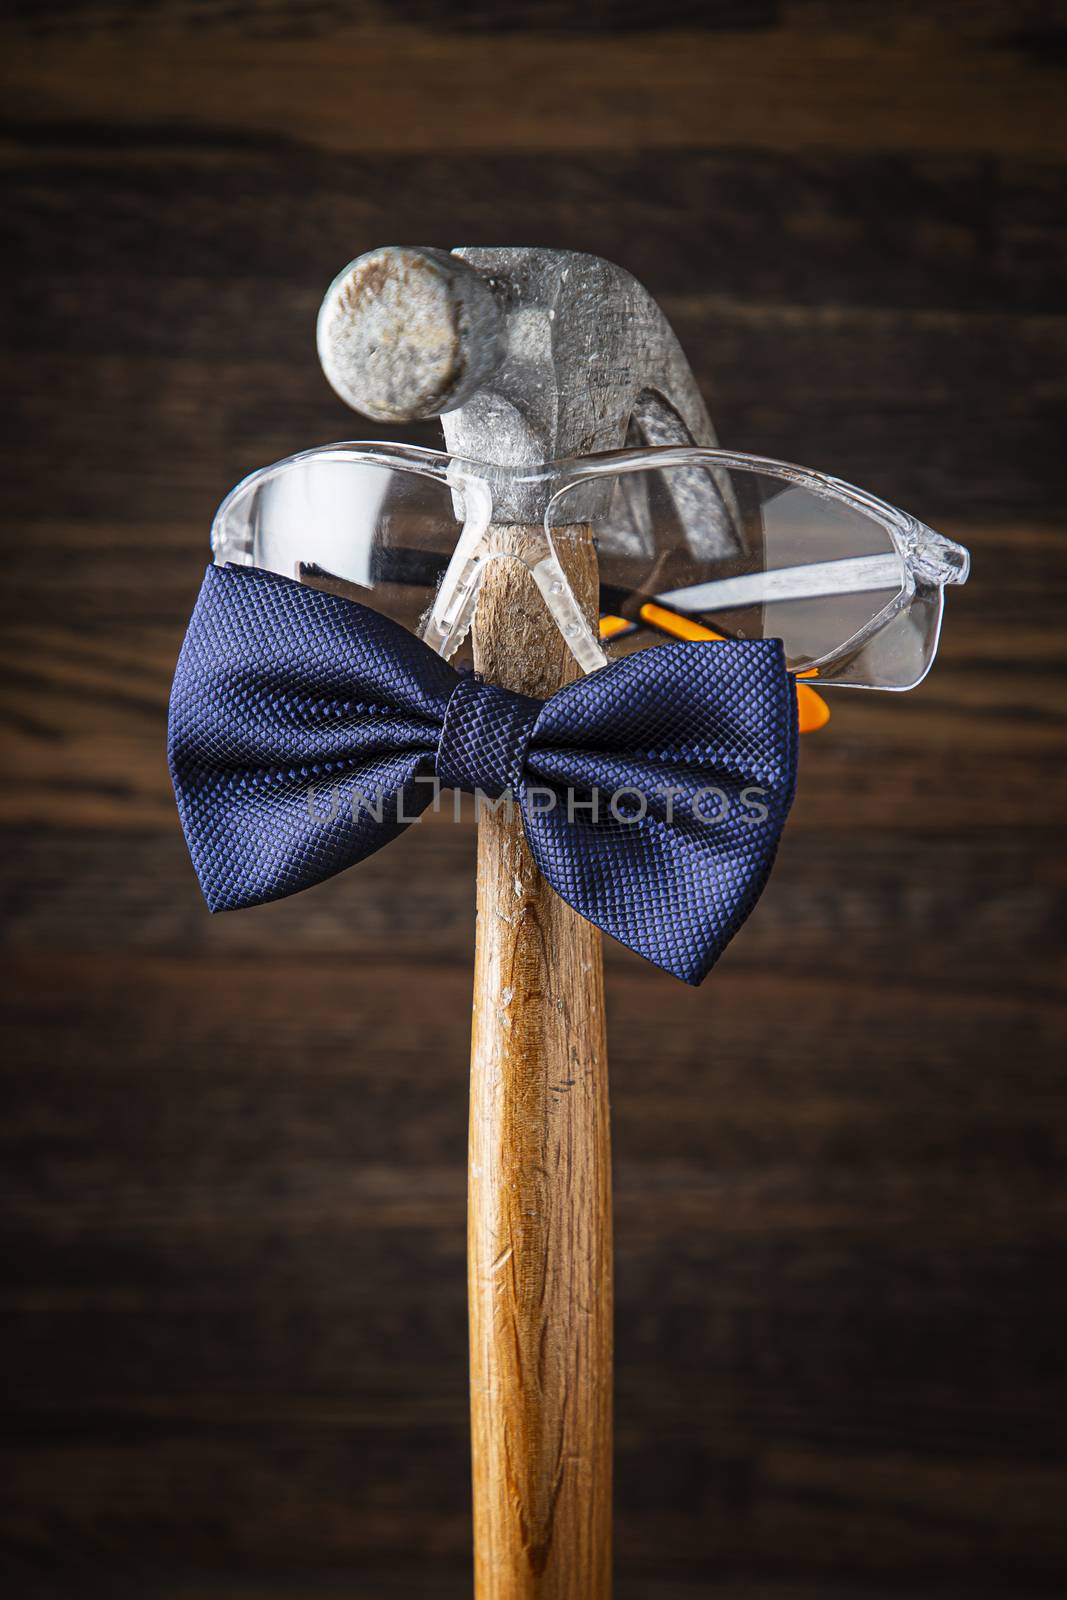 Old weather hammer wearing protective glasses and a blue bowtie against a dark wood background